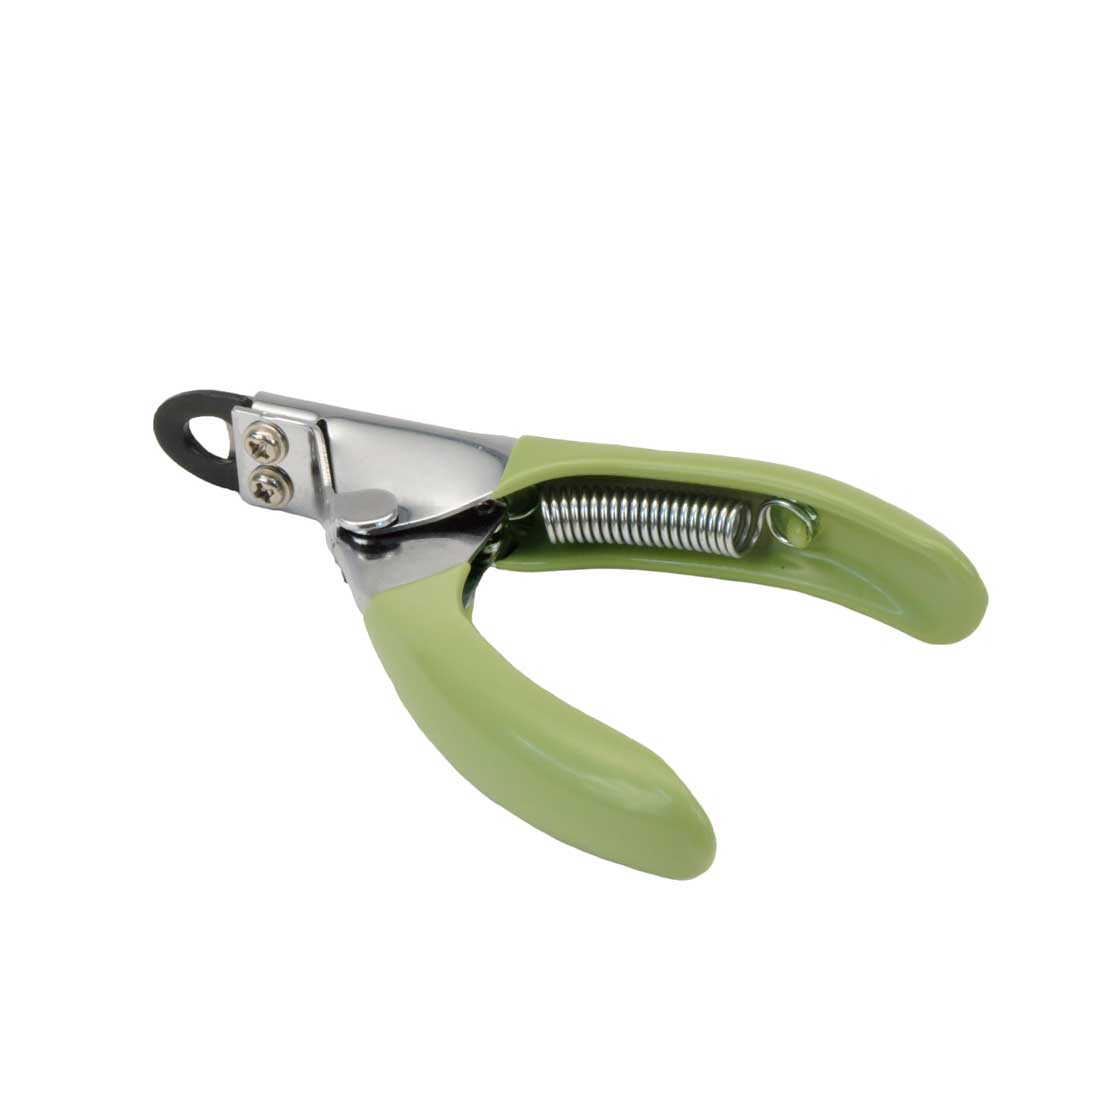 CONAIRPROPET Dog Nail Clippers, Small - Chewy.com